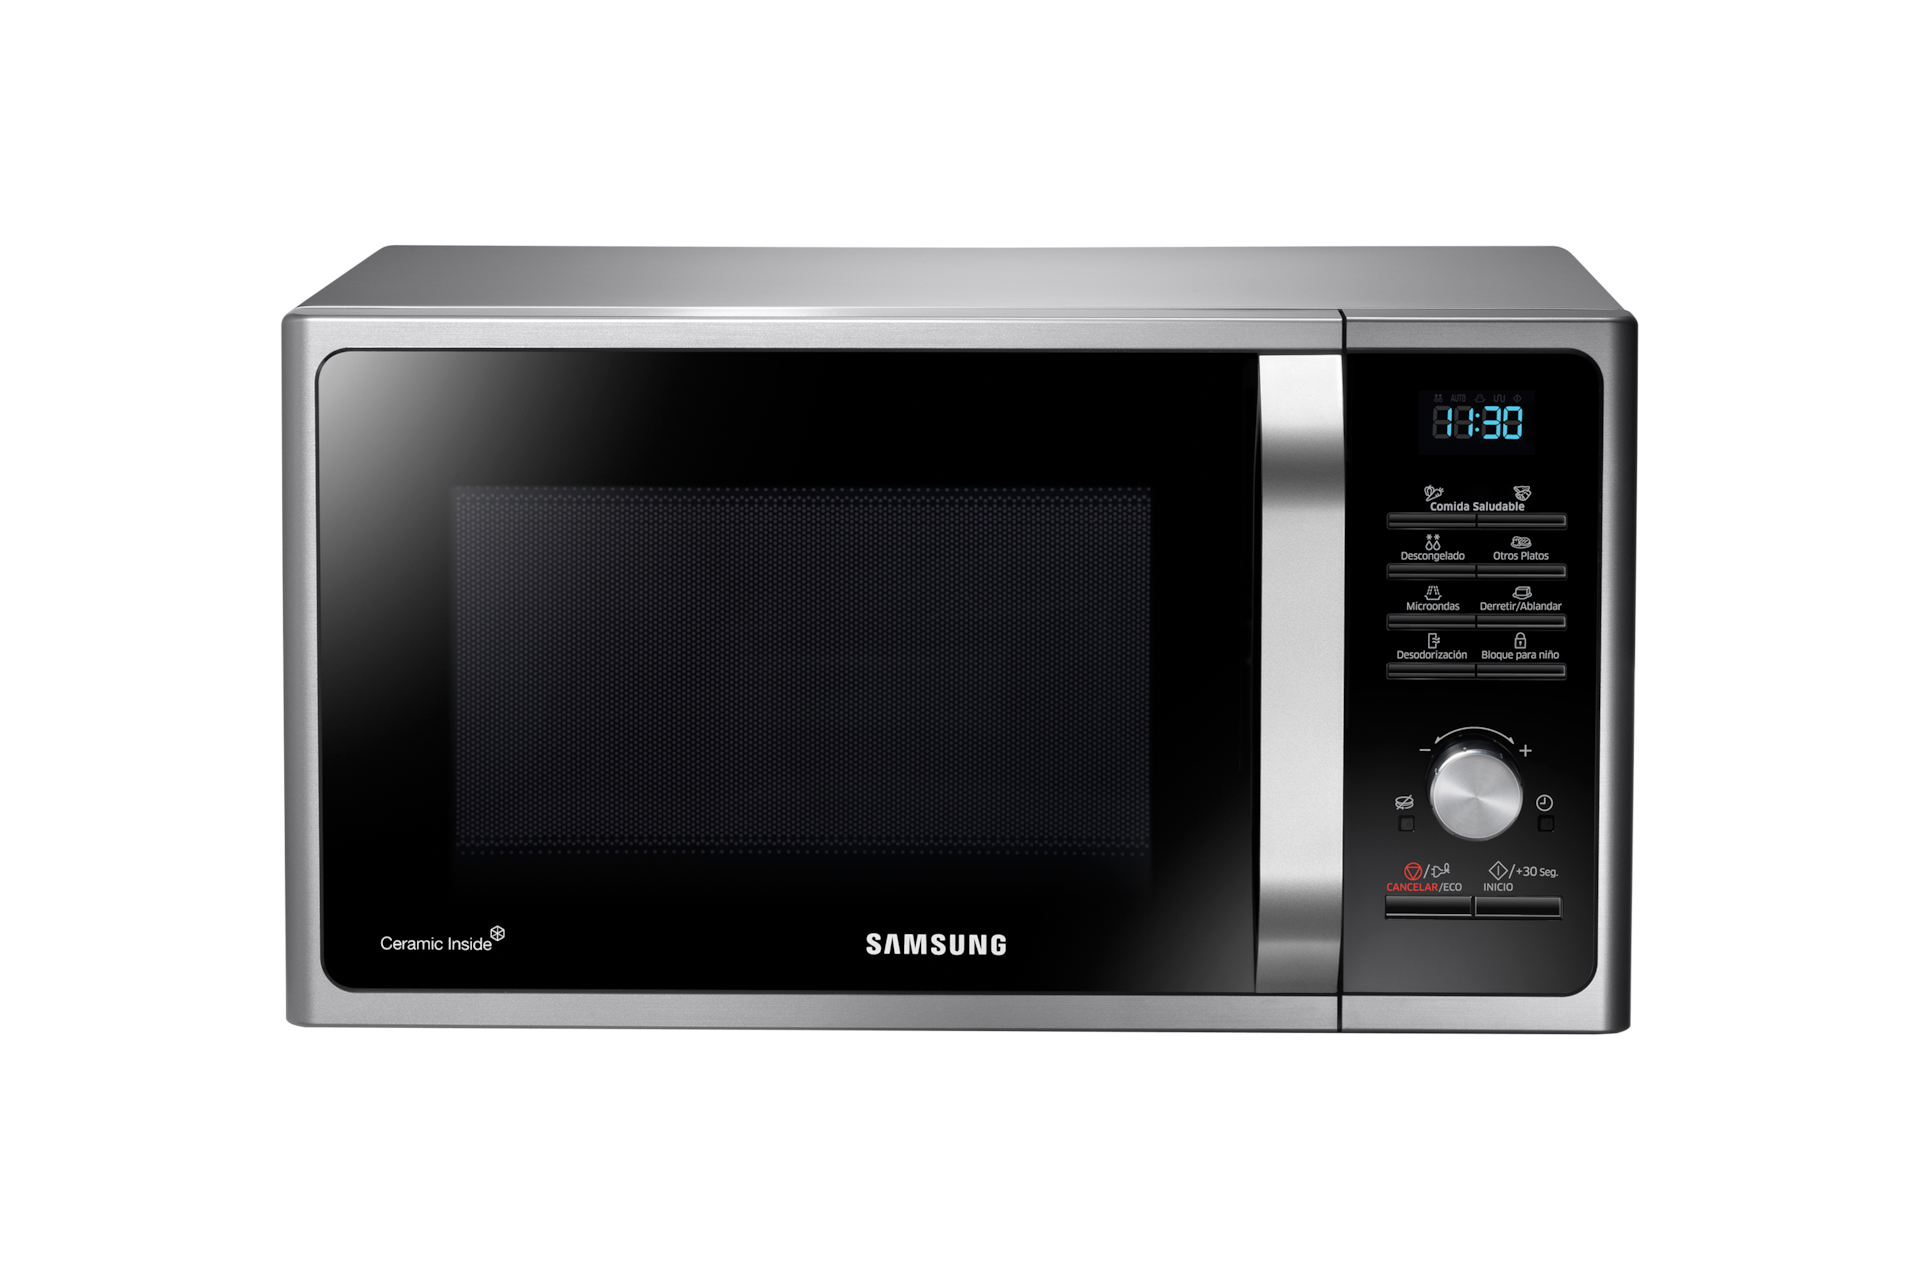 https://images.samsung.com/is/image/samsung/ar-microwave-oven-grill-mg23f3k3tas-mg23f3k3tas-bg-001-front-silver?$650_519_PNG$